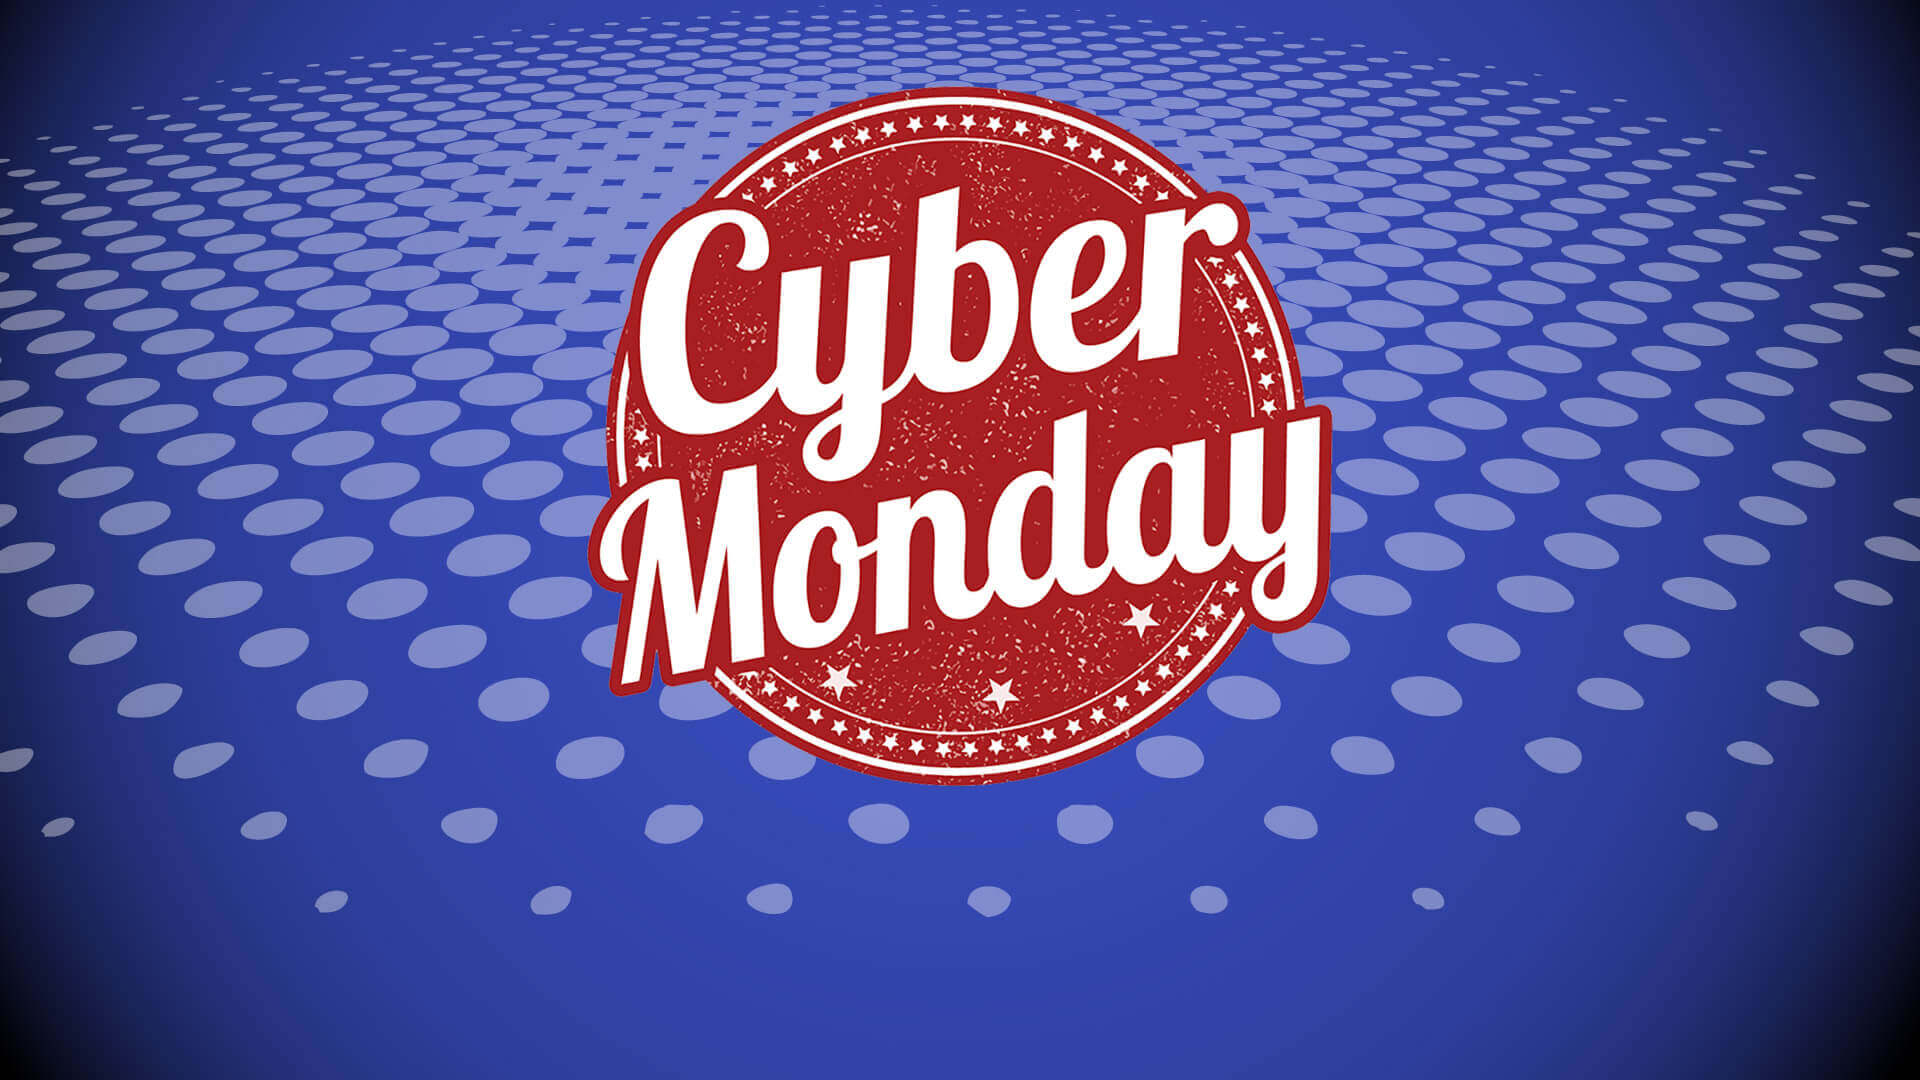 Cyber Monday: 40 best tech deals as selected by our editors